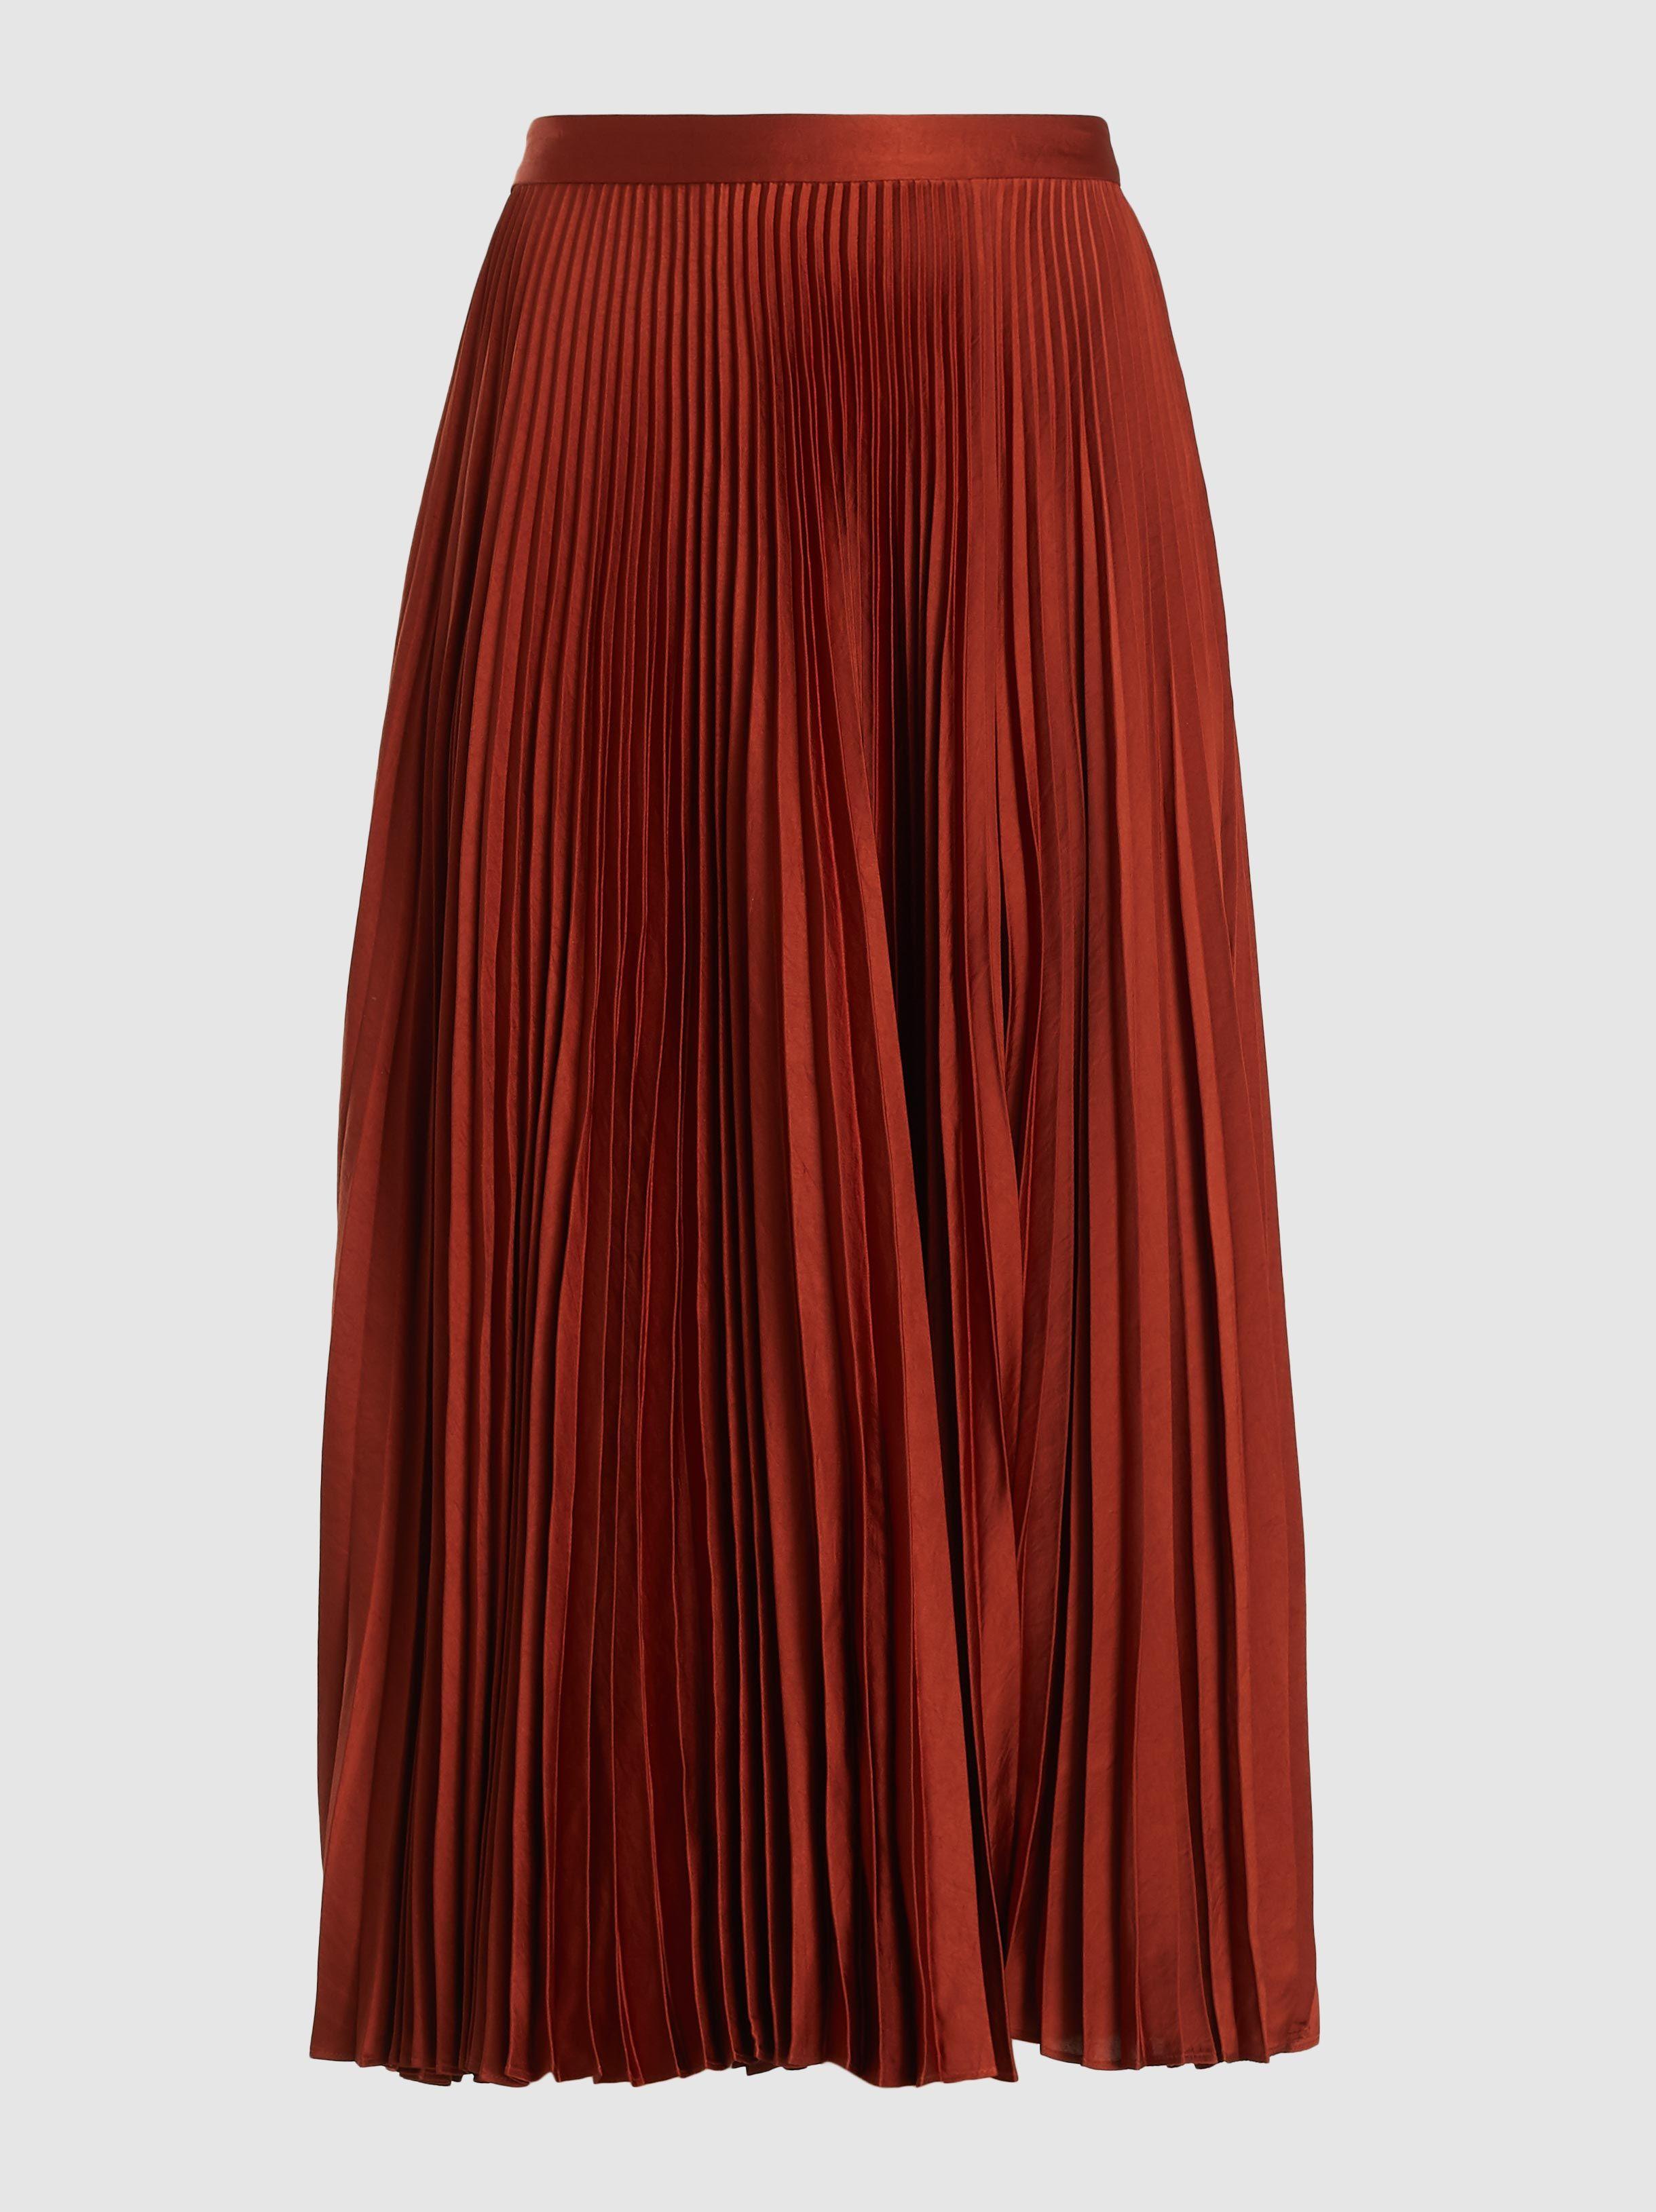 A.L.C. Synthetic Rust Pleated Midi Skirt in Brick (Red) - Lyst